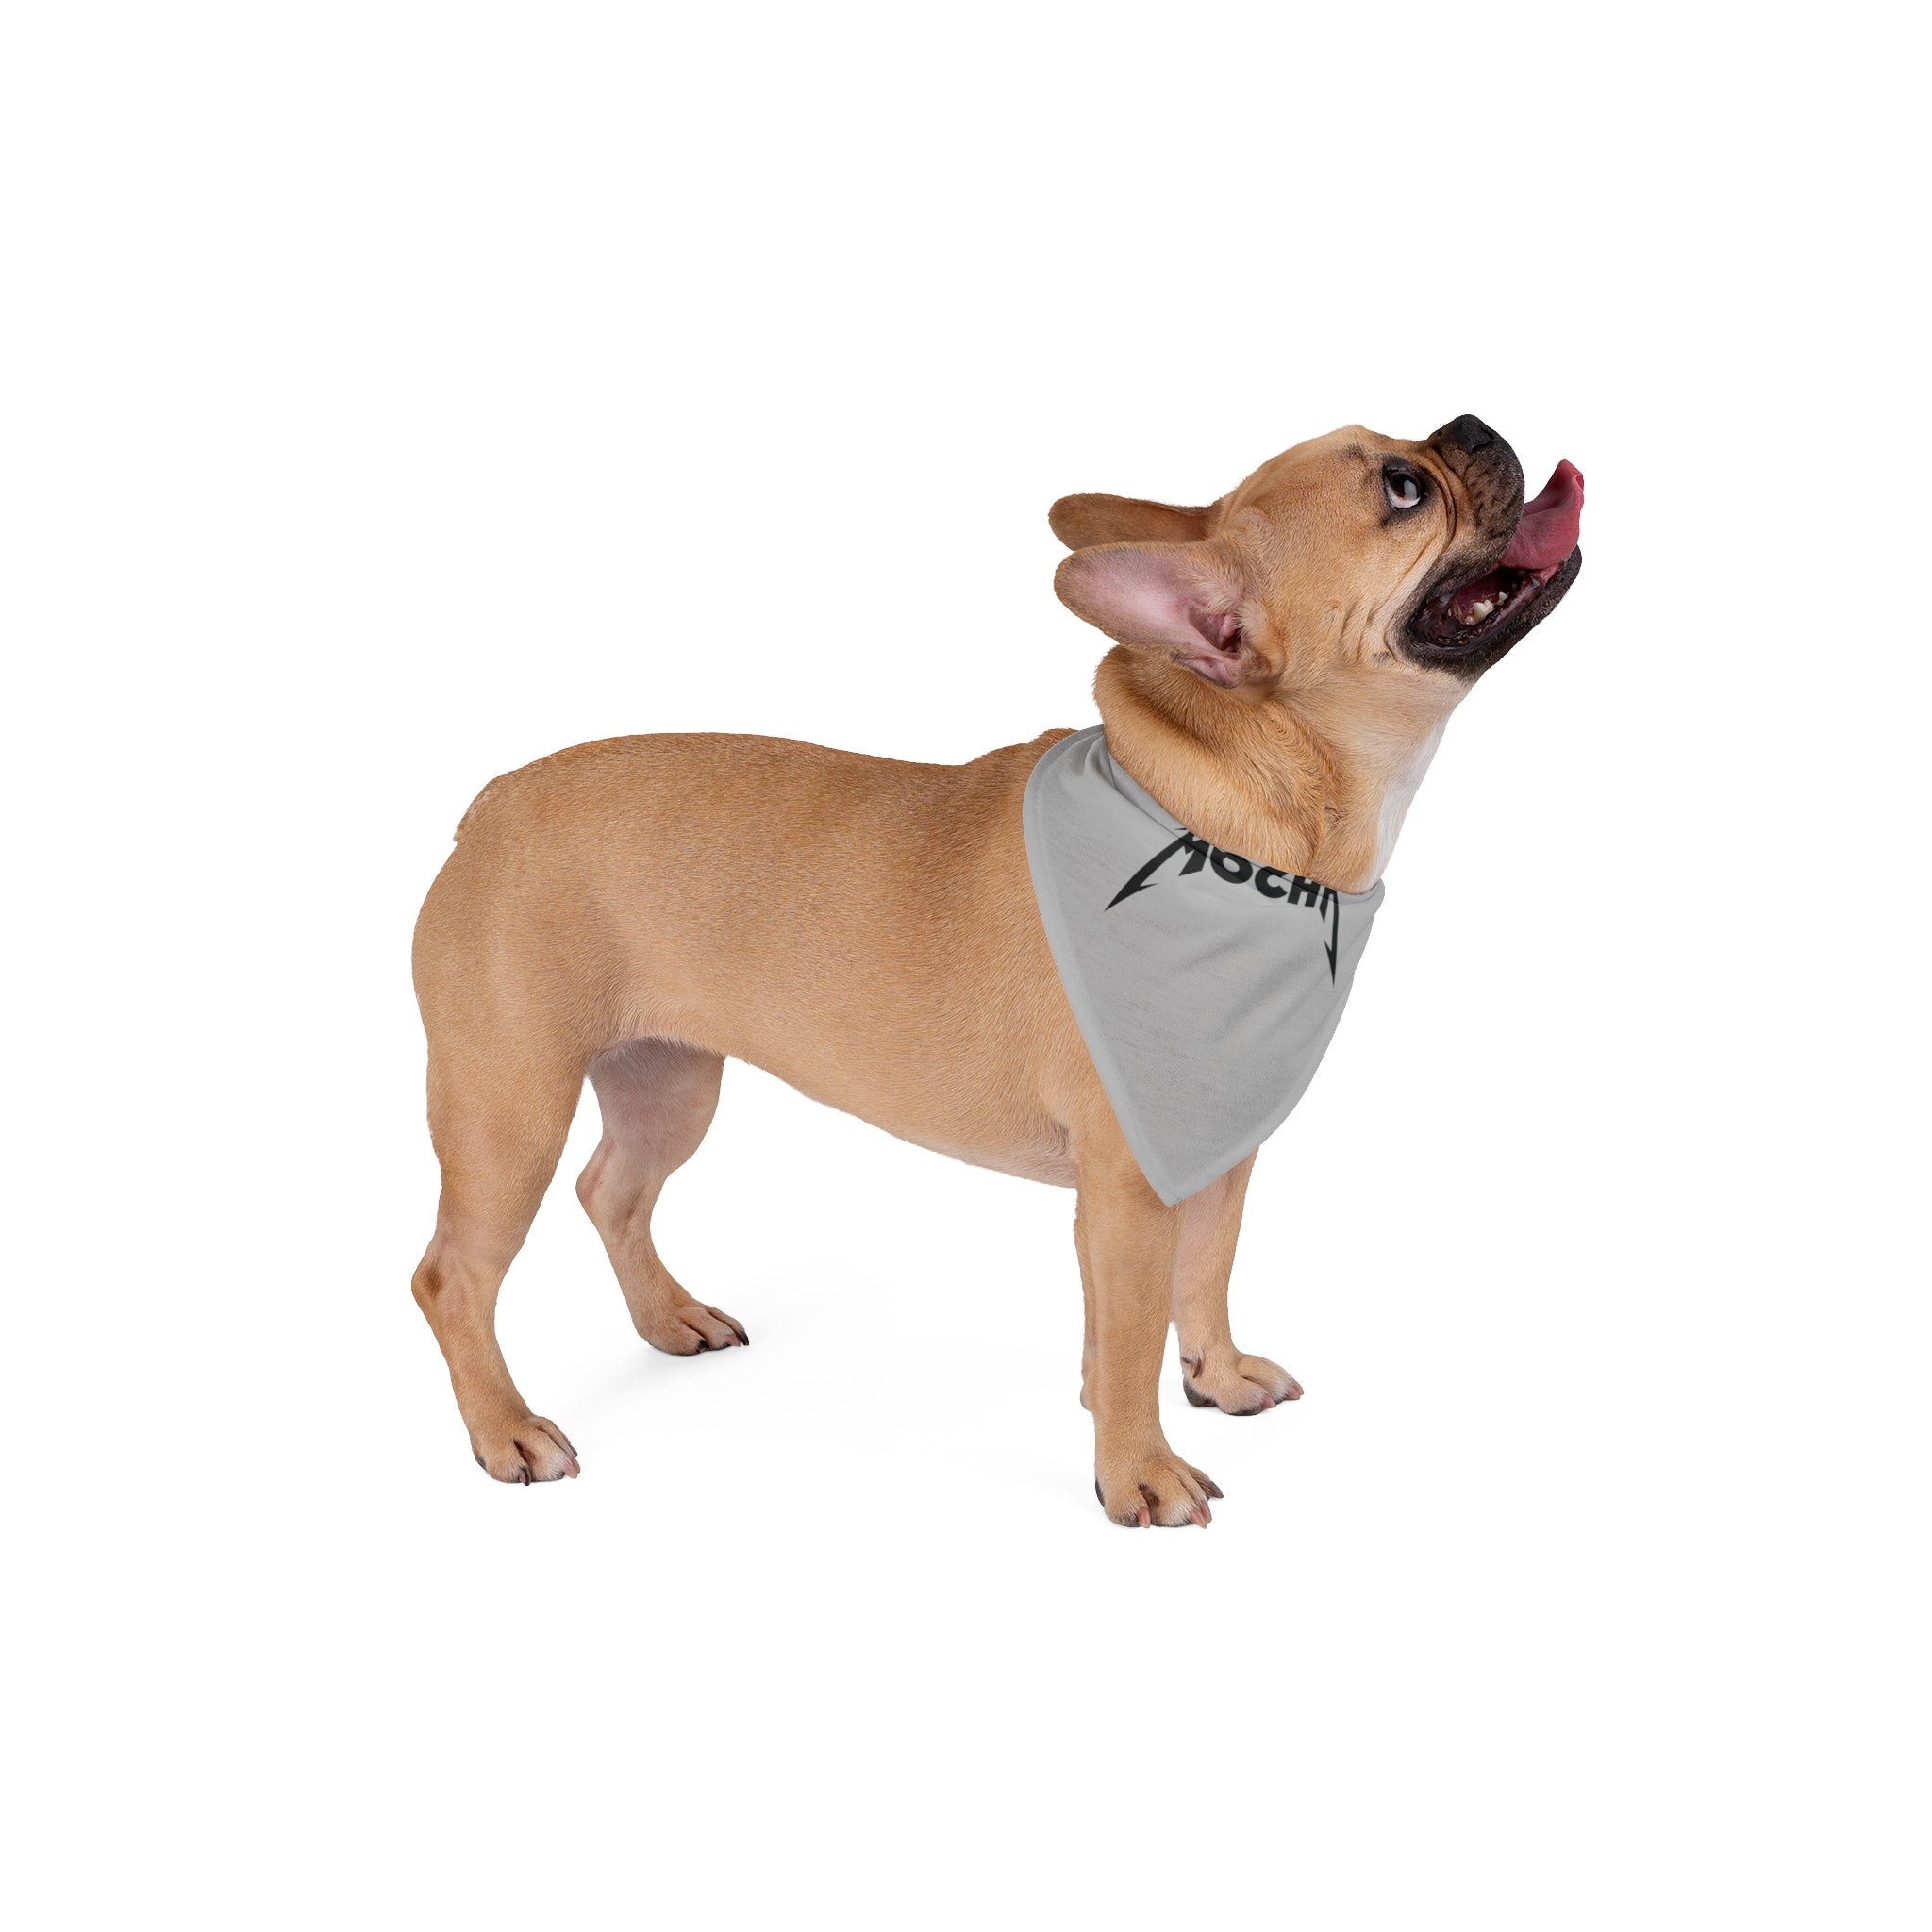 A tan French Bulldog wearing a stylish and skin-friendly Mocha - Pet Bandana made of soft-spun polyester stands on a white background, looking upward with its tongue out.